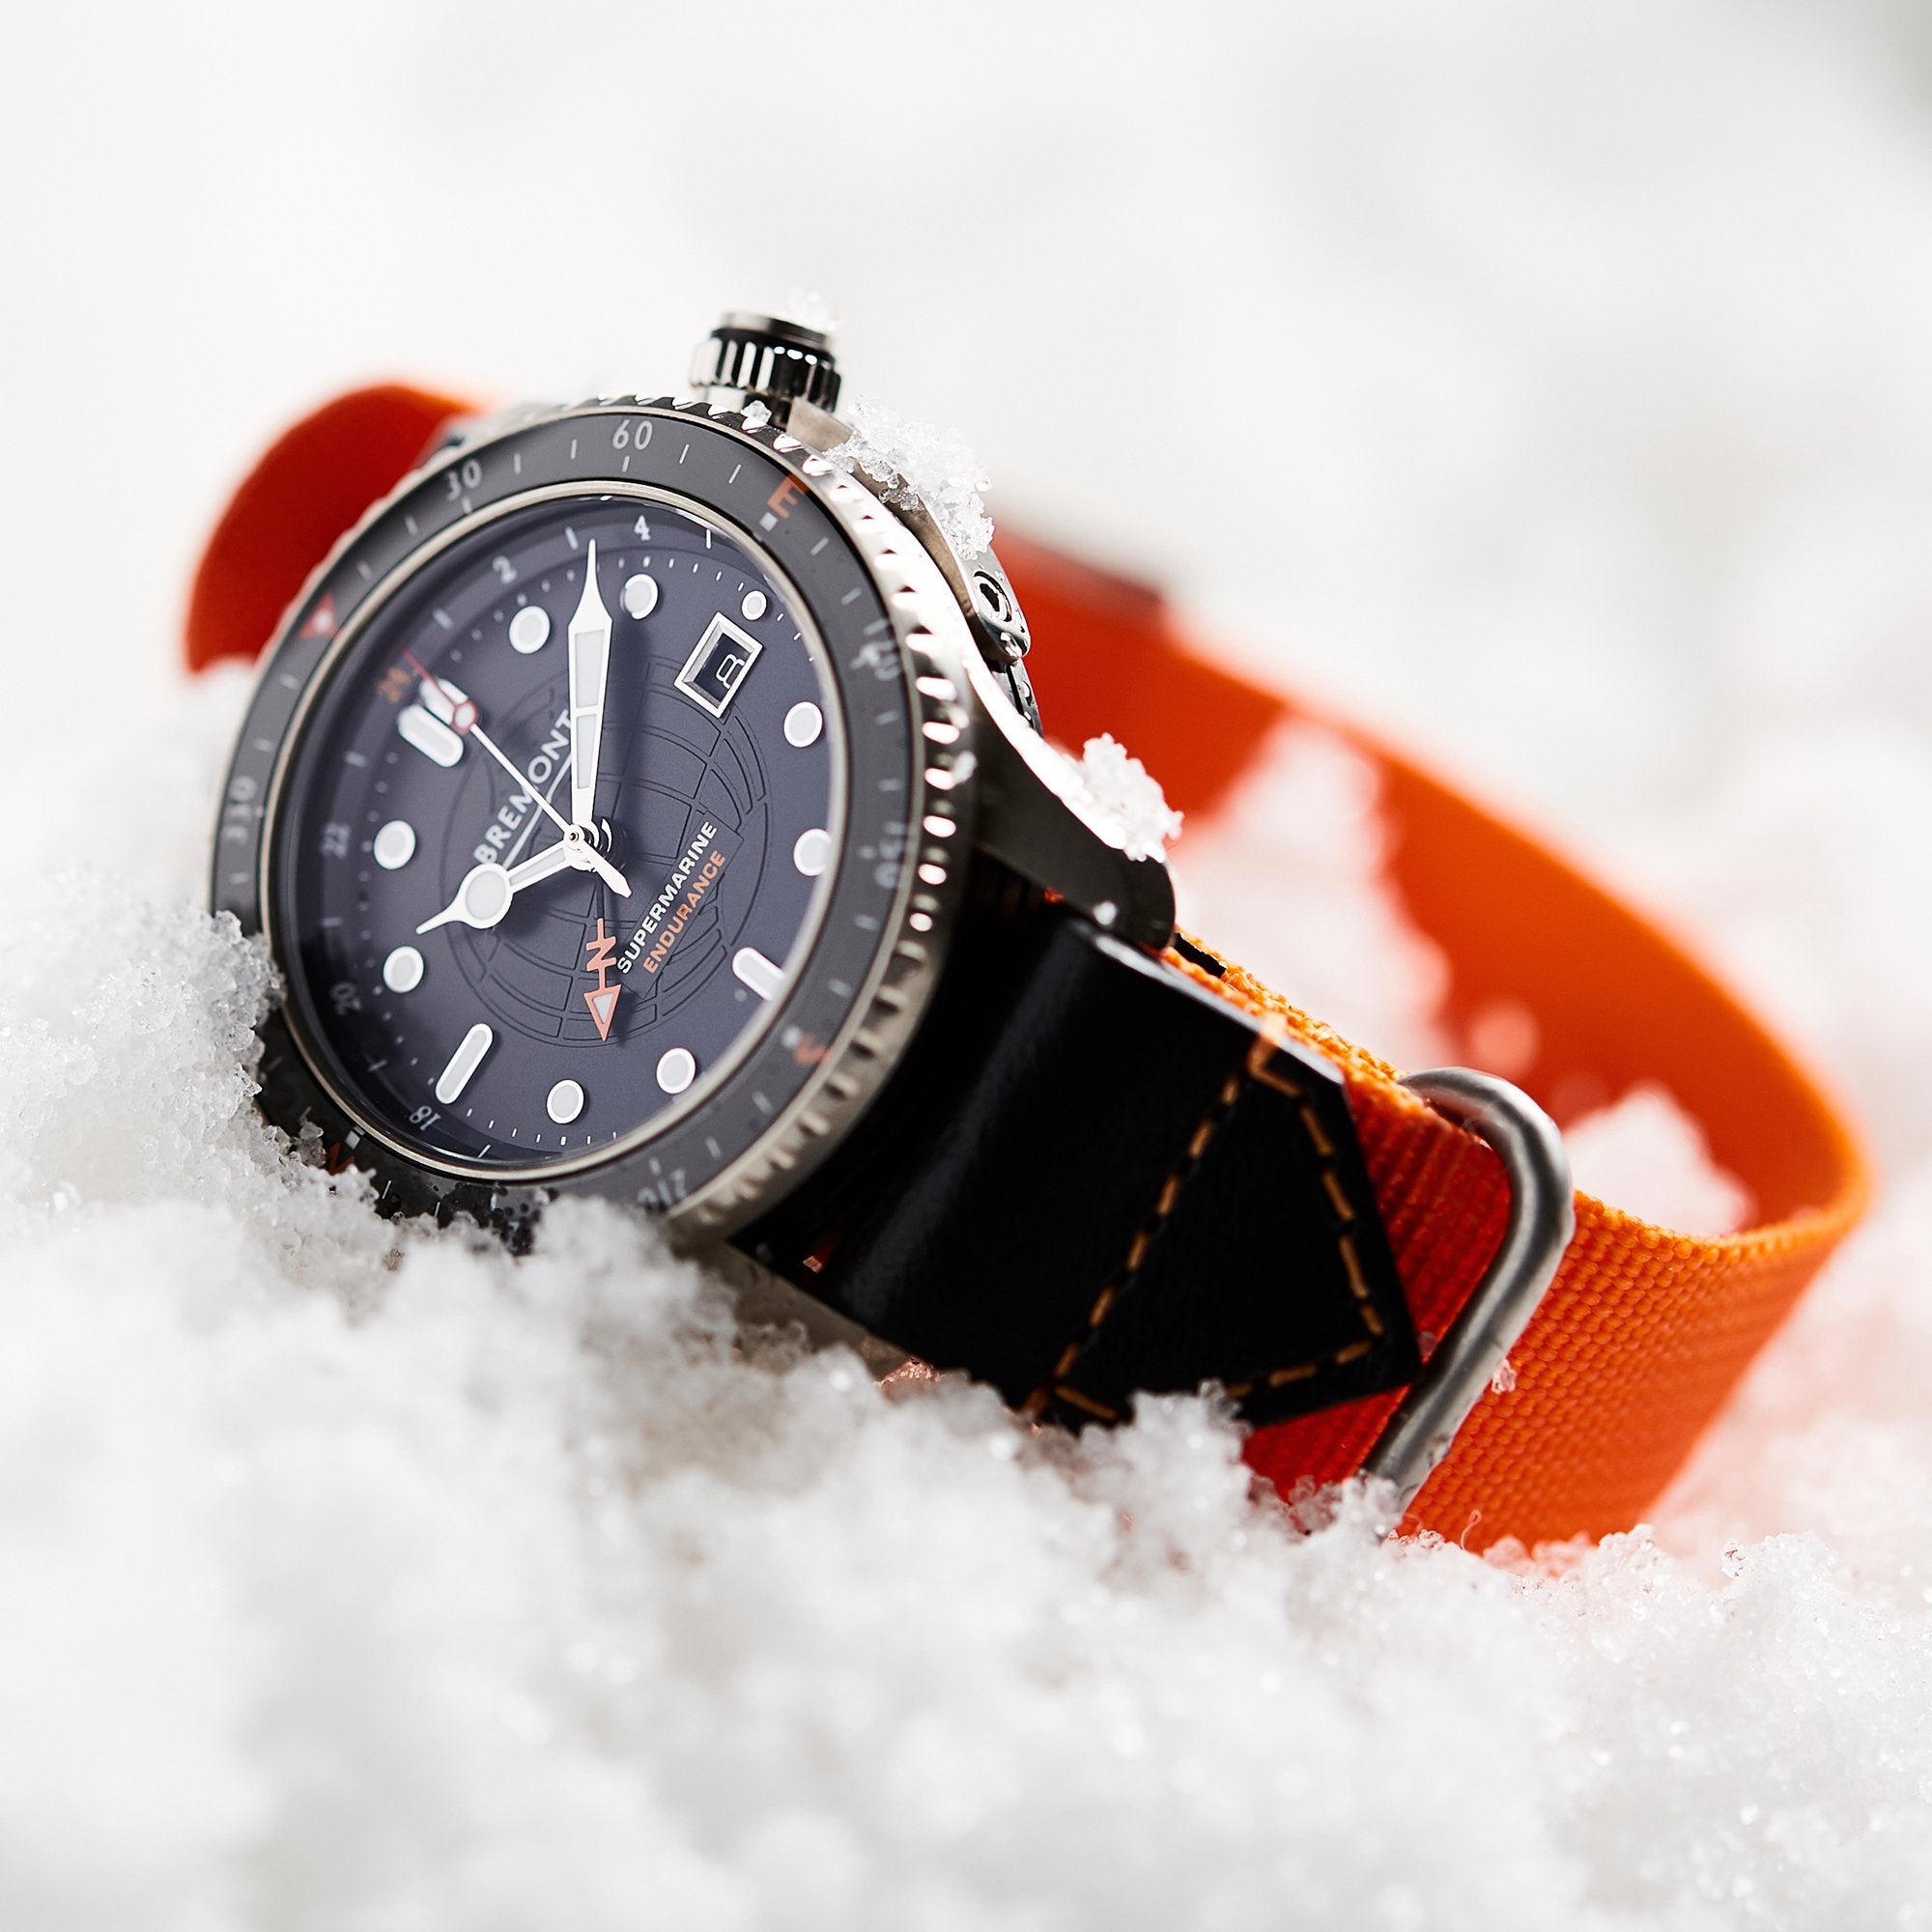 Special Edition Endurance – Bremont Watch Company